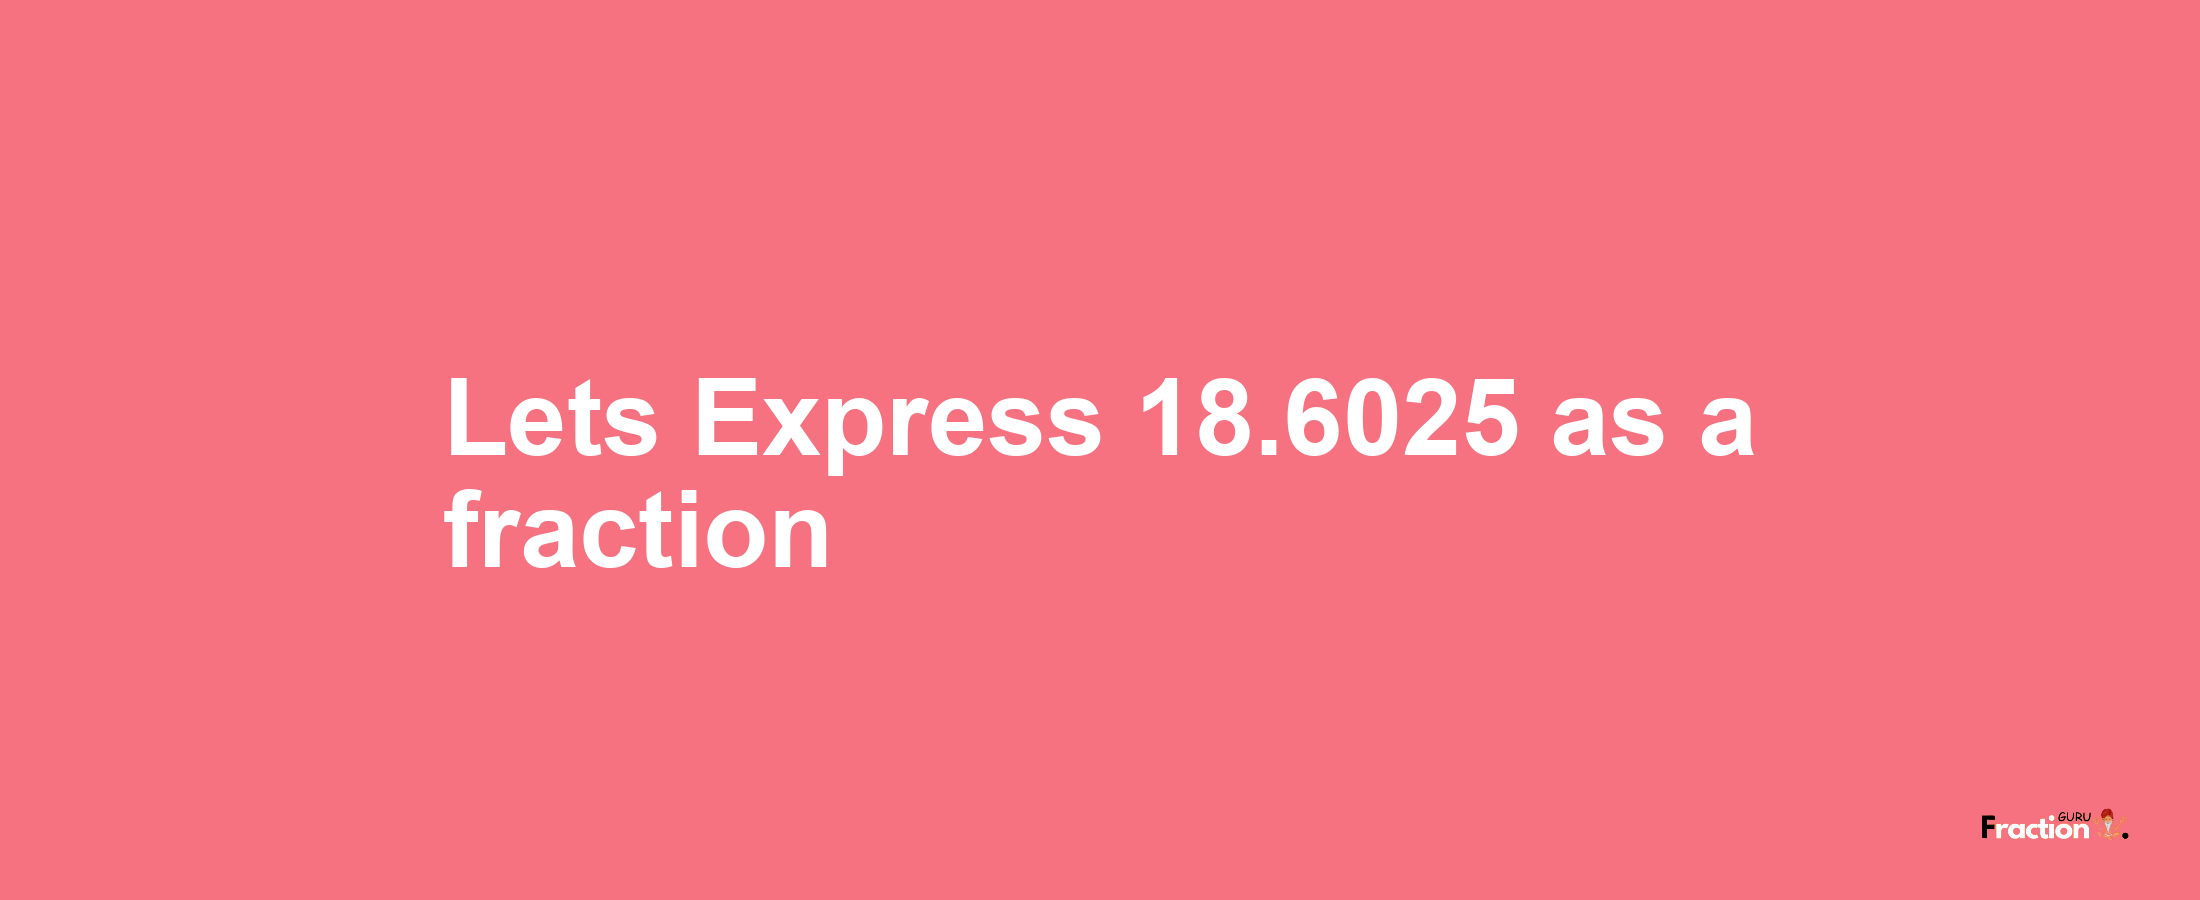 Lets Express 18.6025 as afraction